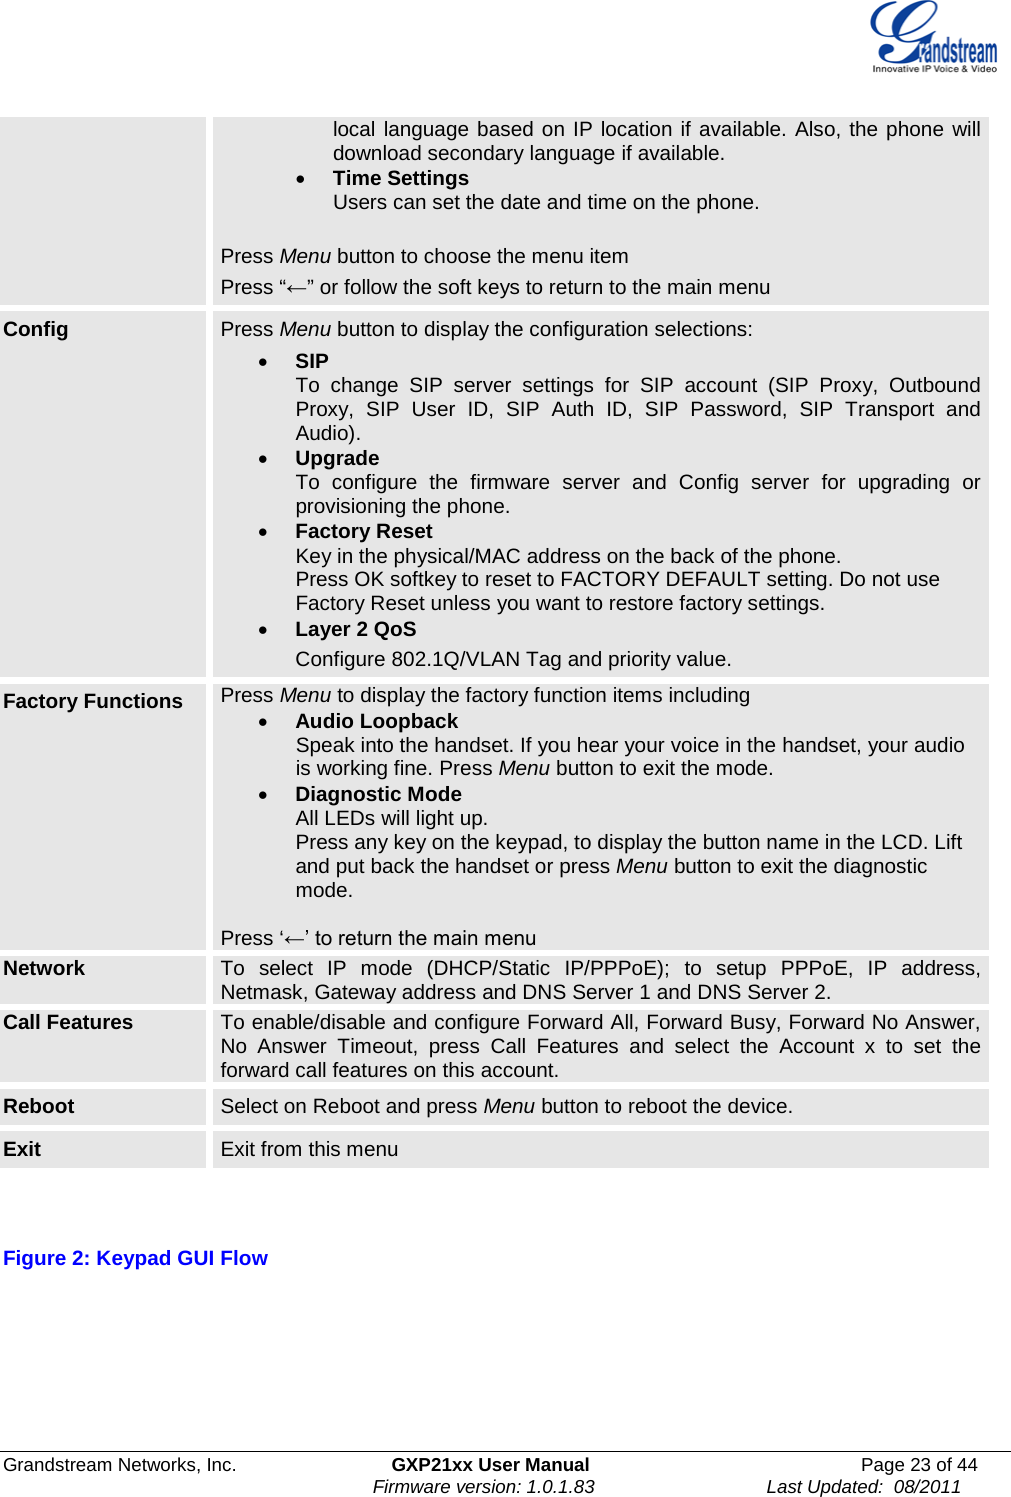  Grandstream Networks, Inc. GXP21xx User Manual Page 23 of 44                                                                Firmware version: 1.0.1.83                                 Last Updated:  08/2011  local language based on IP location if available. Also, the phone will download secondary language if available. • Time Settings Users can set the date and time on the phone.  Press Menu button to choose the menu item Press “←” or follow the soft keys to return to the main menu Config Press Menu button to display the configuration selections: • SIP To change SIP server settings for SIP  account (SIP Proxy, Outbound Proxy, SIP User ID, SIP Auth ID, SIP Password, SIP Transport and Audio). • Upgrade To  configure the firmware server and Config server for upgrading or provisioning the phone.  • Factory Reset Key in the physical/MAC address on the back of the phone. Press OK softkey to reset to FACTORY DEFAULT setting. Do not use Factory Reset unless you want to restore factory settings. • Layer 2 QoS              Configure 802.1Q/VLAN Tag and priority value. Factory Functions Press Menu to display the factory function items including • Audio Loopback              Speak into the handset. If you hear your voice in the handset, your audio                is working fine. Press Menu button to exit the mode. • Diagnostic Mode All LEDs will light up. Press any key on the keypad, to display the button name in the LCD. Lift and put back the handset or press Menu button to exit the diagnostic mode.  Press ‘←’ to return the main menu Network To  select IP mode (DHCP/Static IP/PPPoE); to setup PPPoE, IP address, Netmask, Gateway address and DNS Server 1 and DNS Server 2. Call Features To enable/disable and configure Forward All, Forward Busy, Forward No Answer, No Answer Timeout, press Call Features and select the Account x to set the forward call features on this account. Reboot Select on Reboot and press Menu button to reboot the device. Exit Exit from this menu   Figure 2: Keypad GUI Flow 